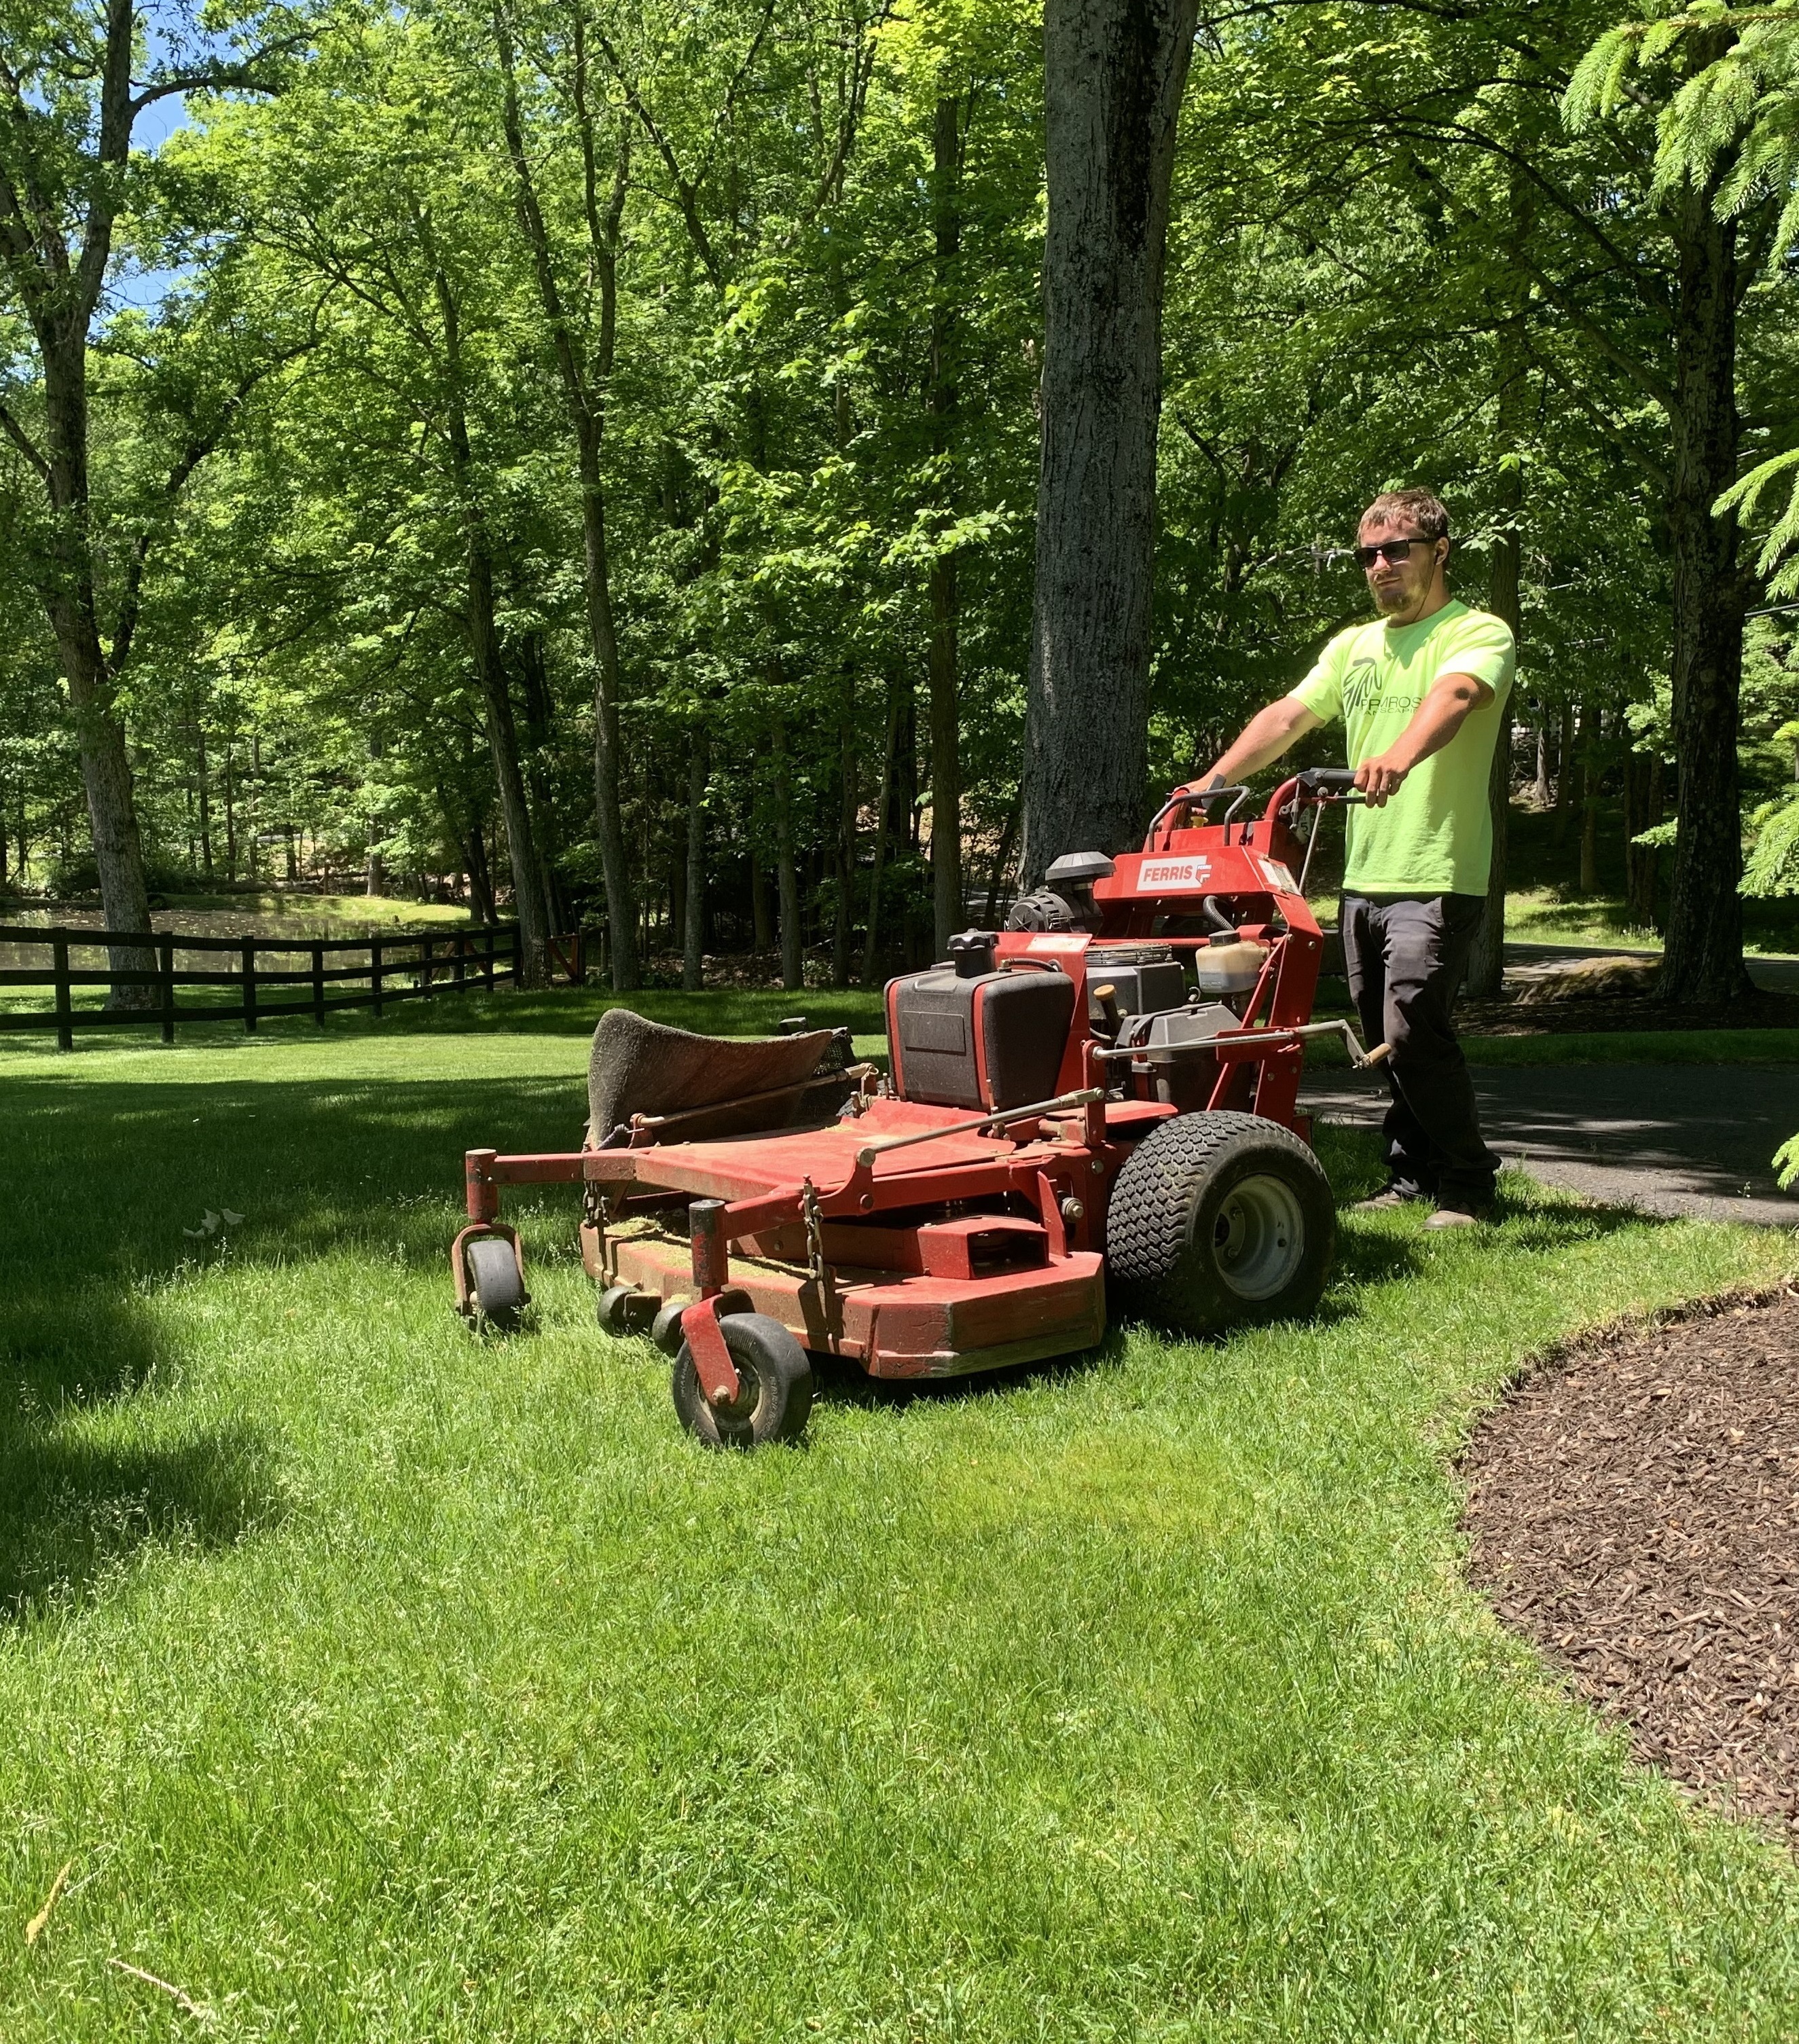 Lawn Landscaping Employment Jobs In, Landscaping Jobs Hiring Now